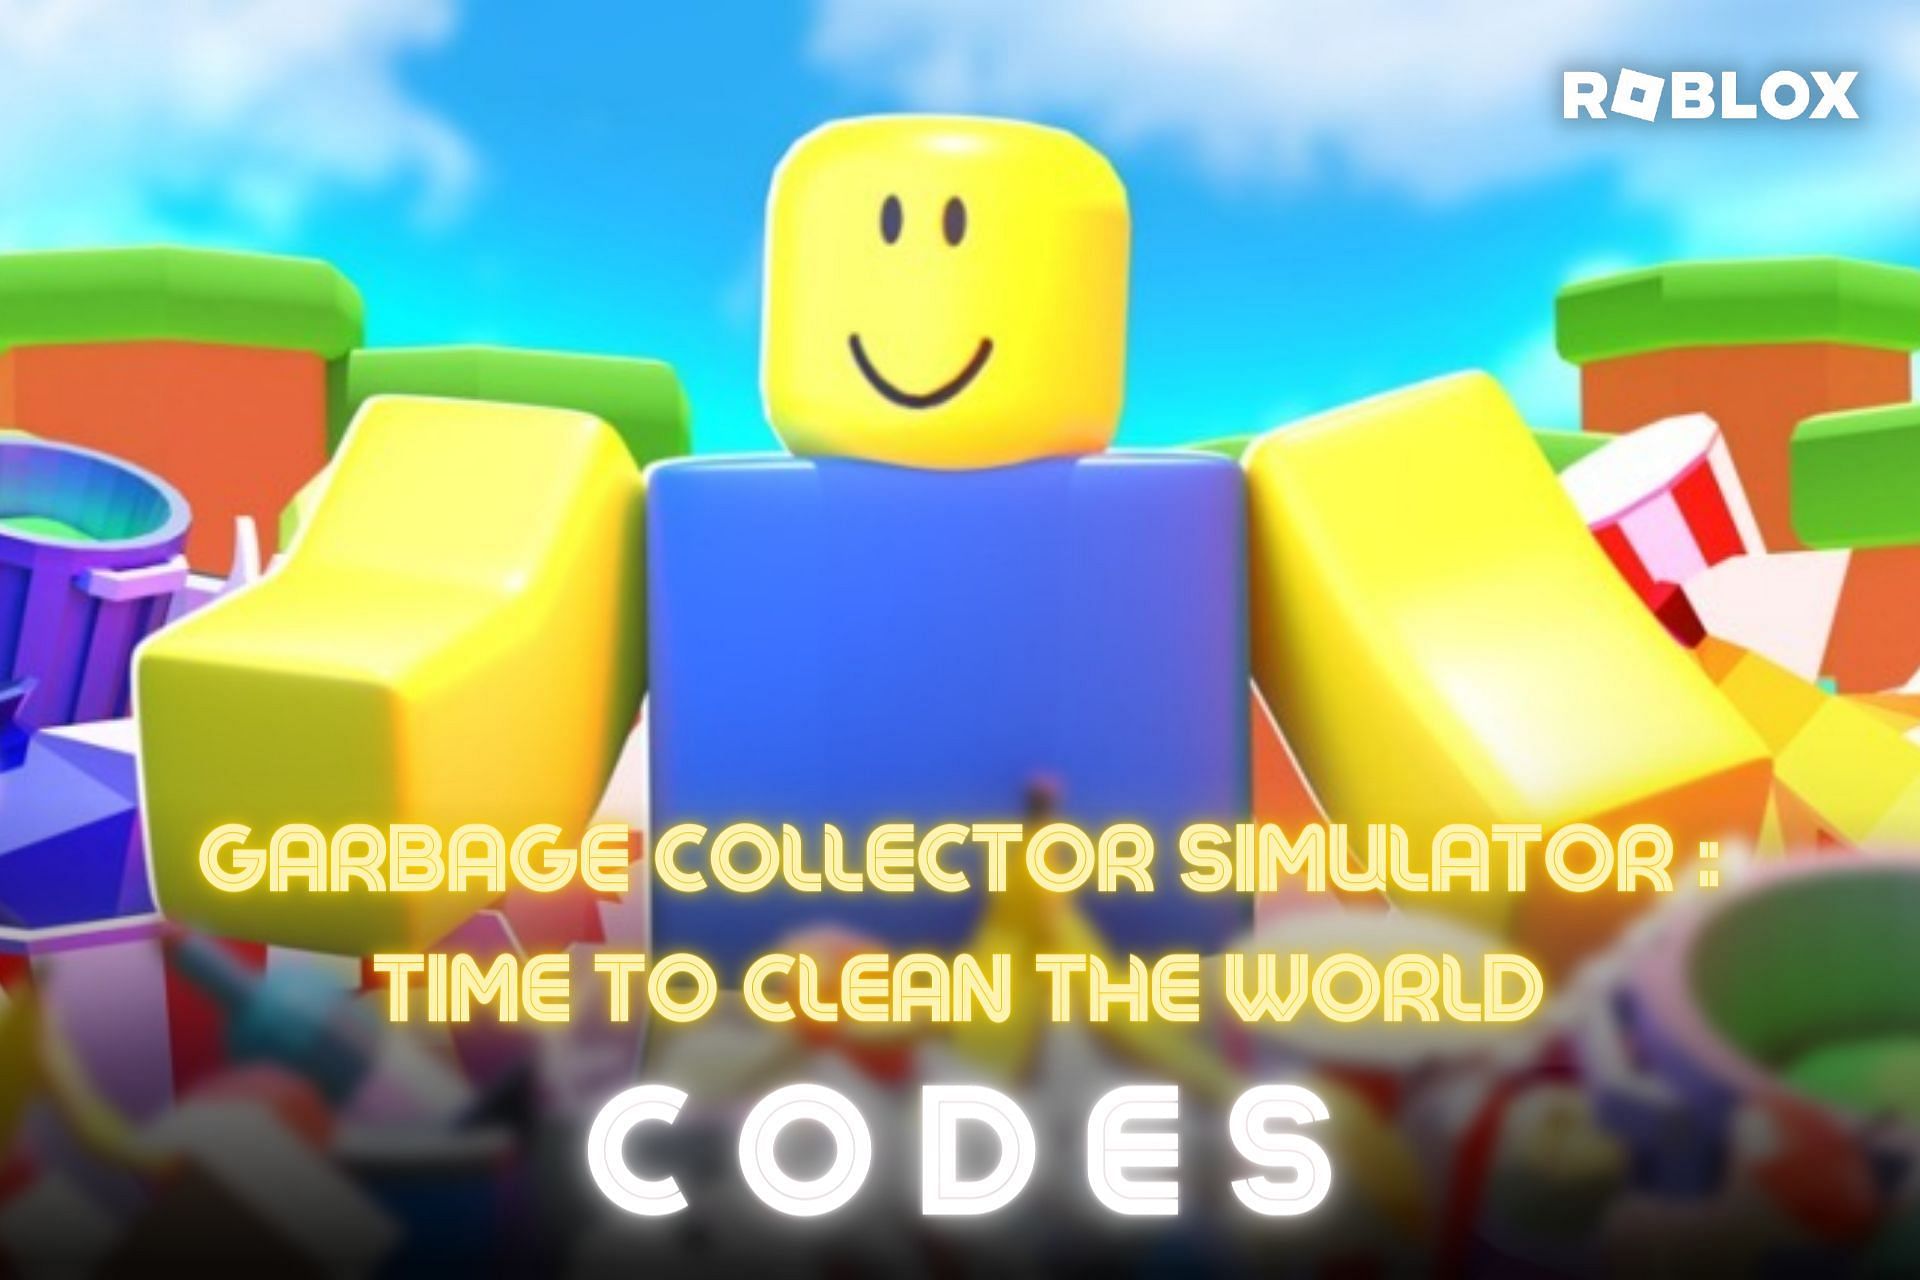 Roblox Garbage Collector Simulator : Time To Clean The World (Image via Roblox)